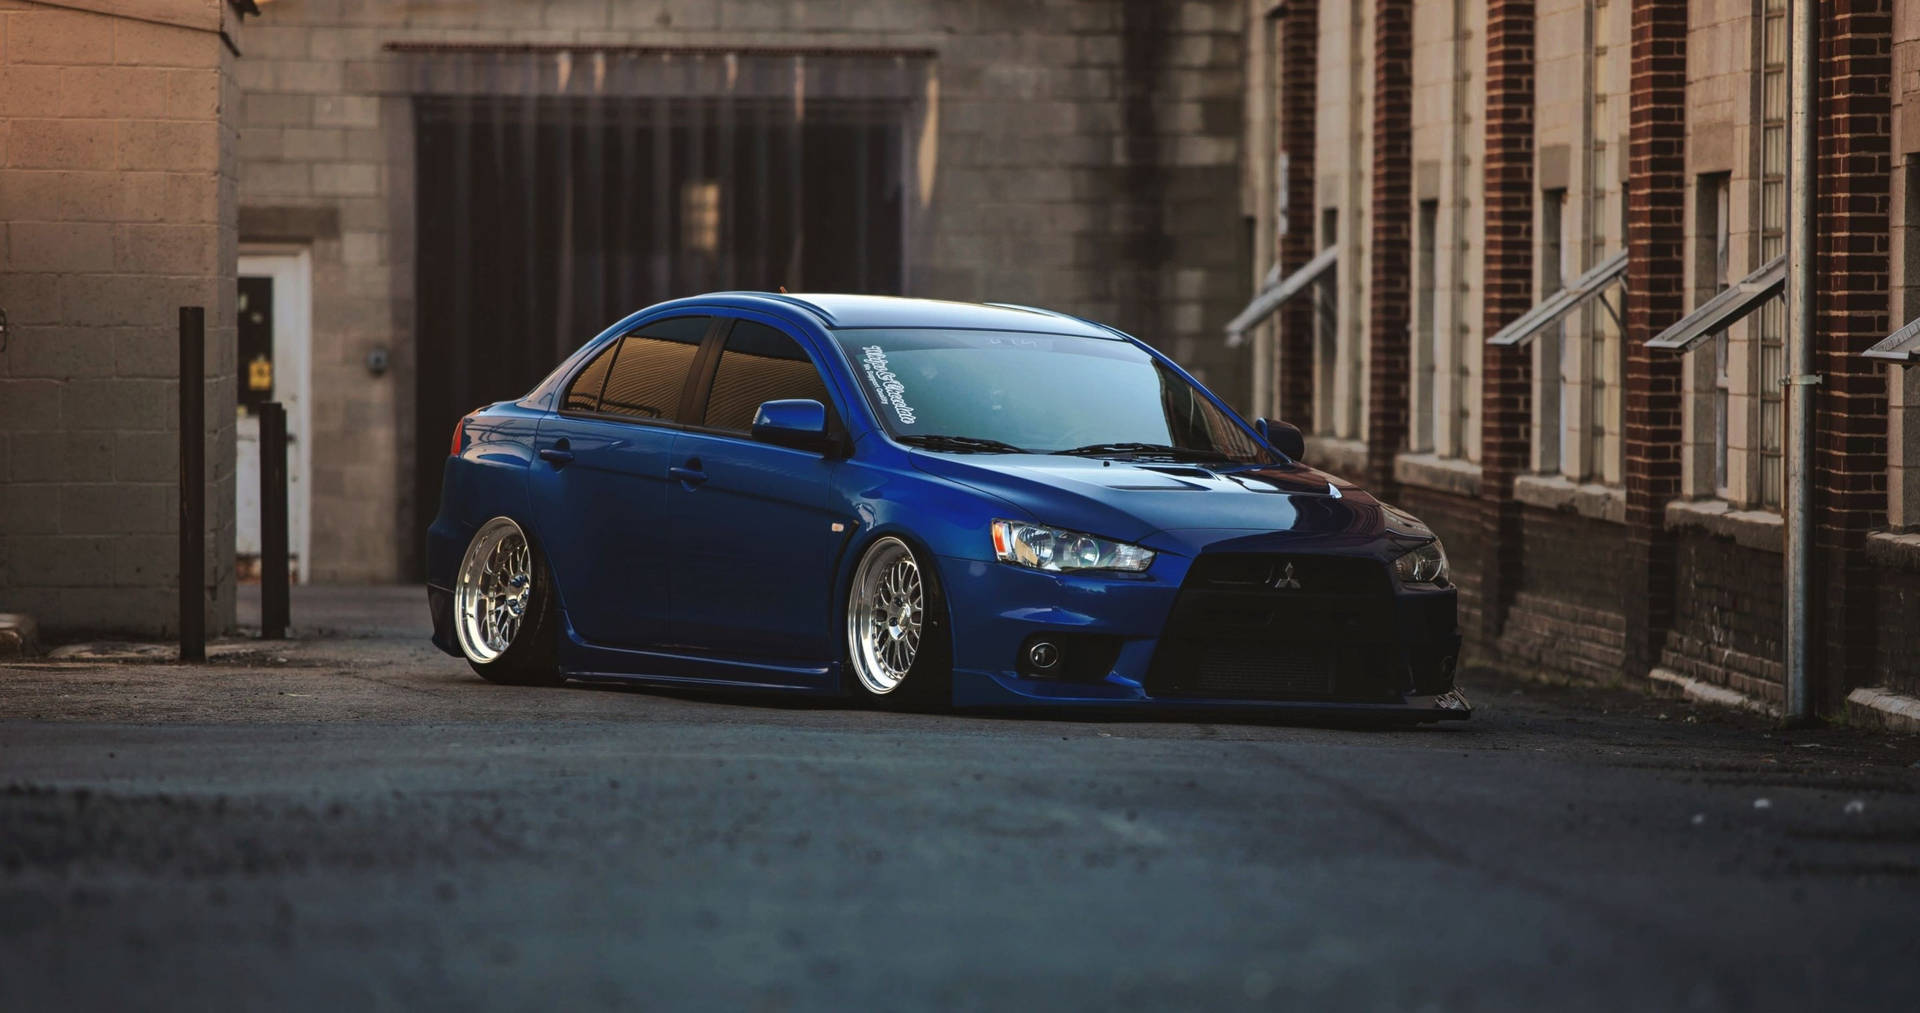 A Brilliant Blue Jdm Mitsubishi Evo Parked in Front of a Building Wallpaper